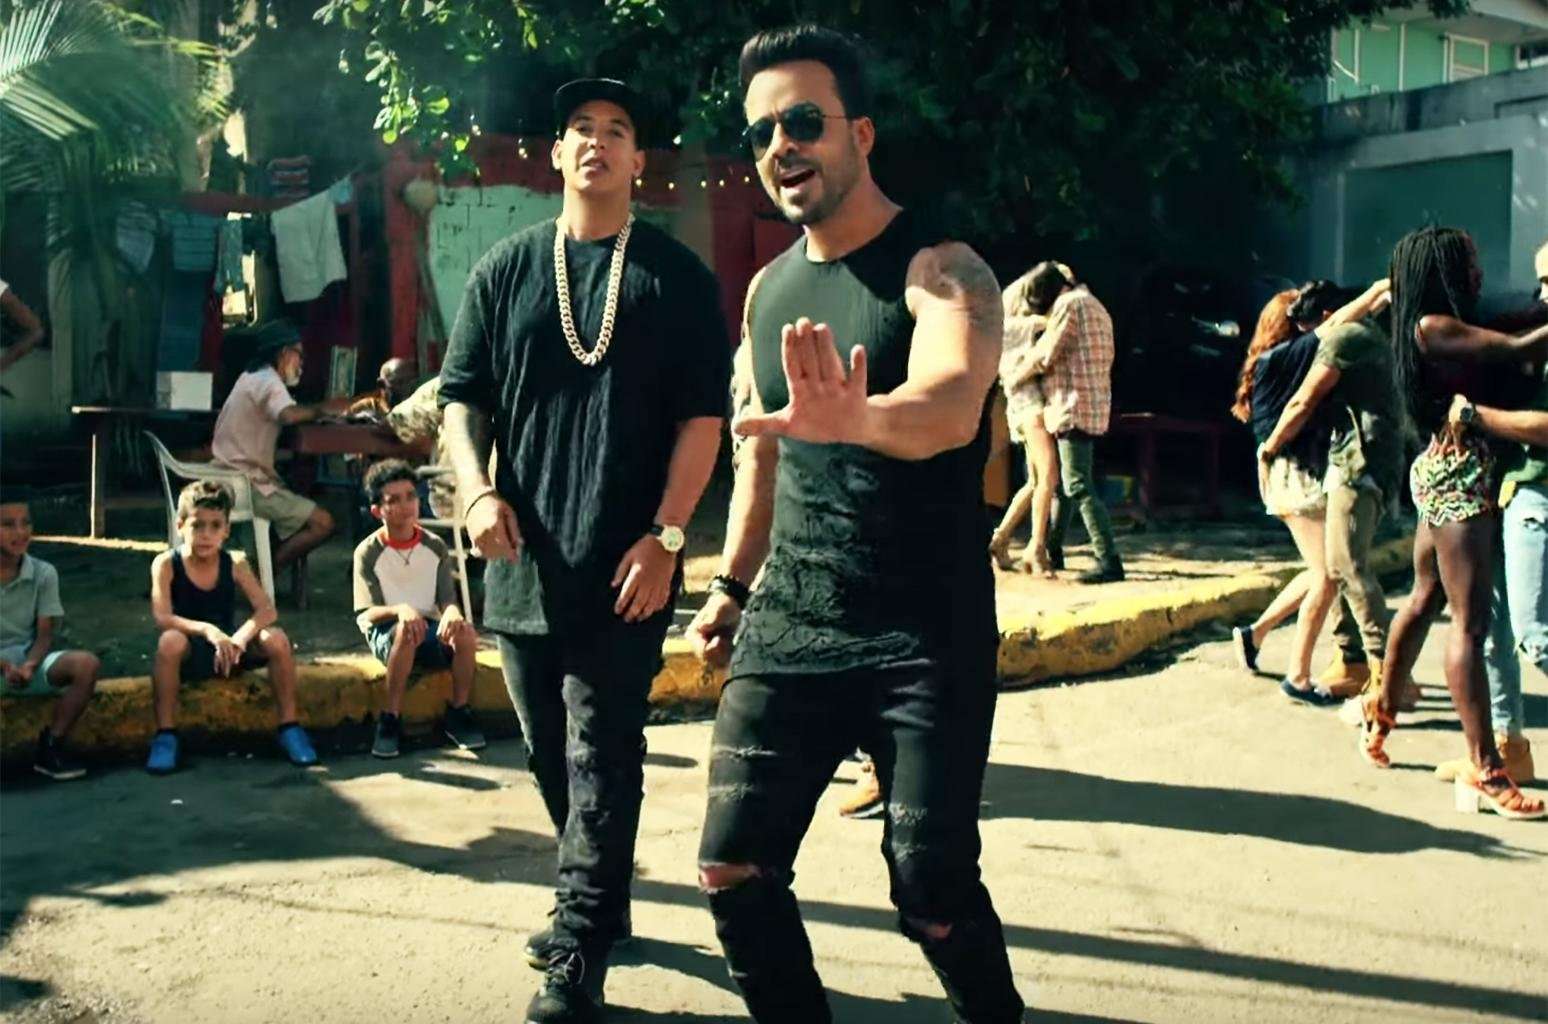 image for Despacito: Most watched YouTube video ever 'deleted' in apparent hack